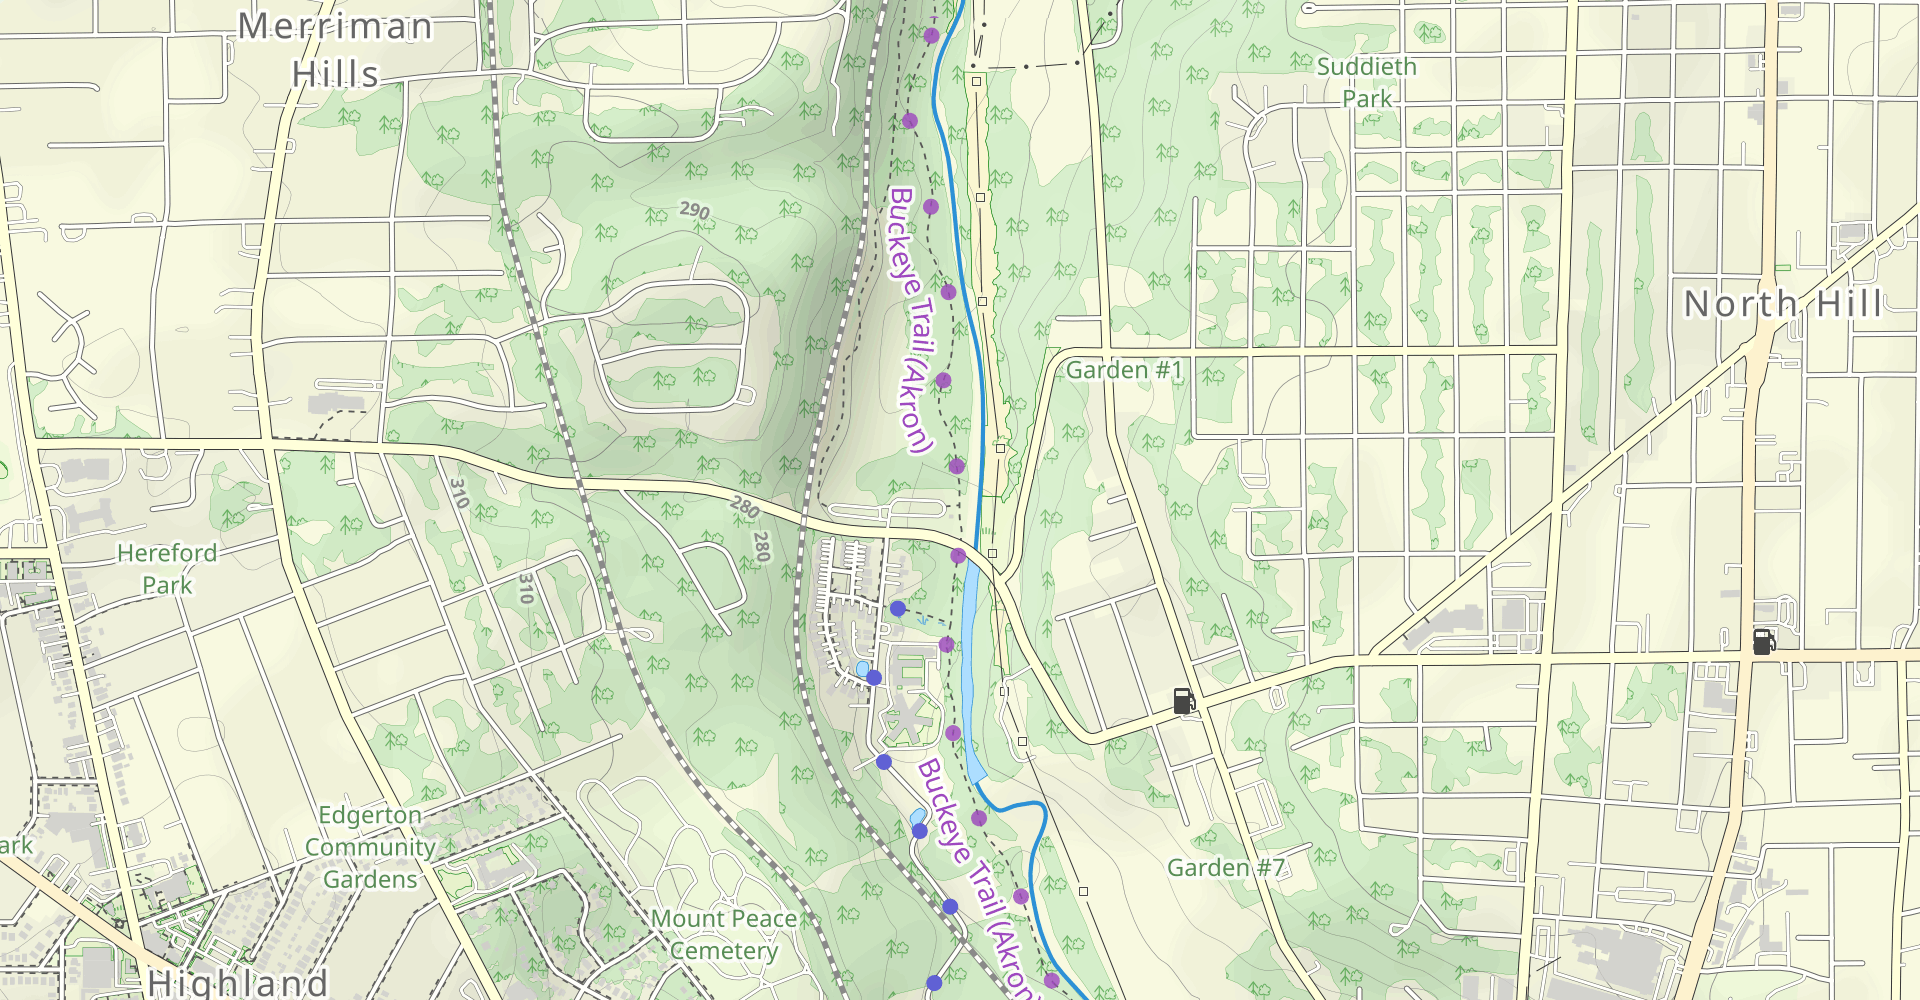 Ohio and Erie Canal Towpath Trail from Memorial Parkway